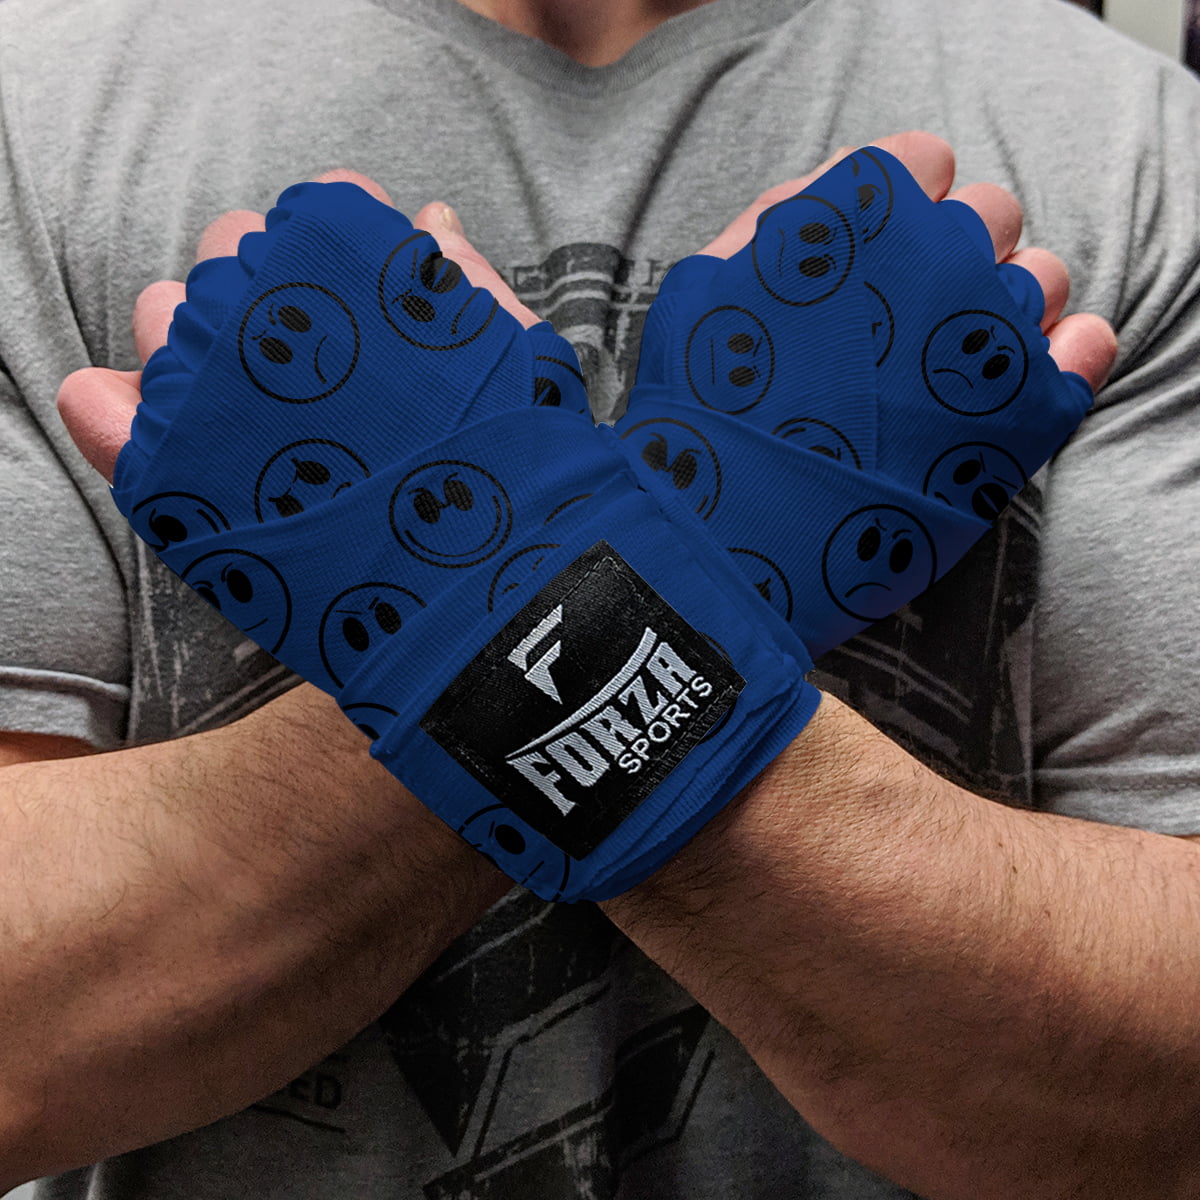 Boxing MuayThai Hand Wraps Elastic inner glove mexcian style stretchy 180" blue 